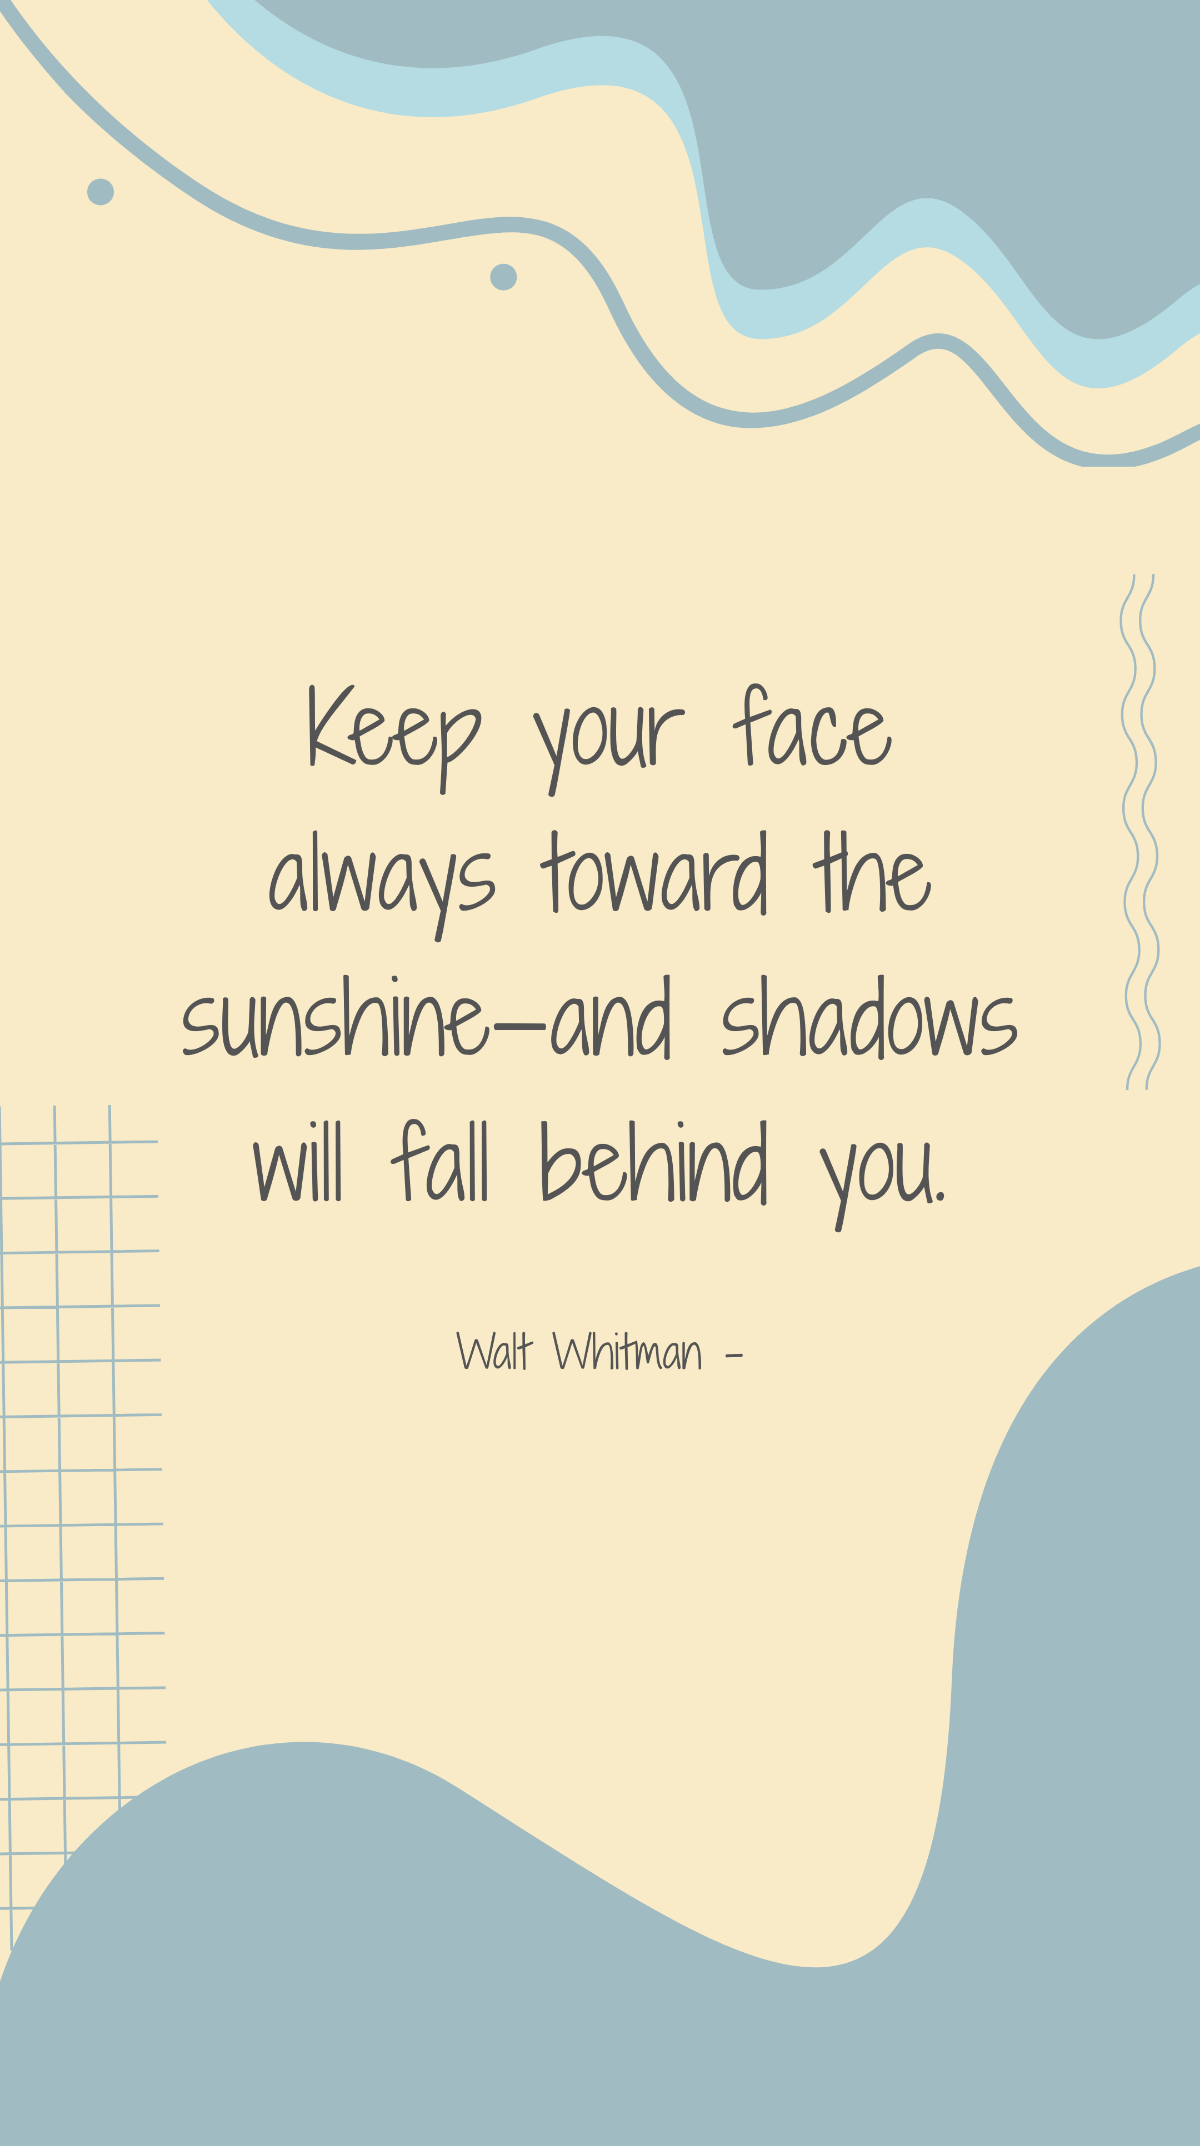 Walt Whitman - Keep your face always toward the sunshine—and shadows will fall behind you. Template